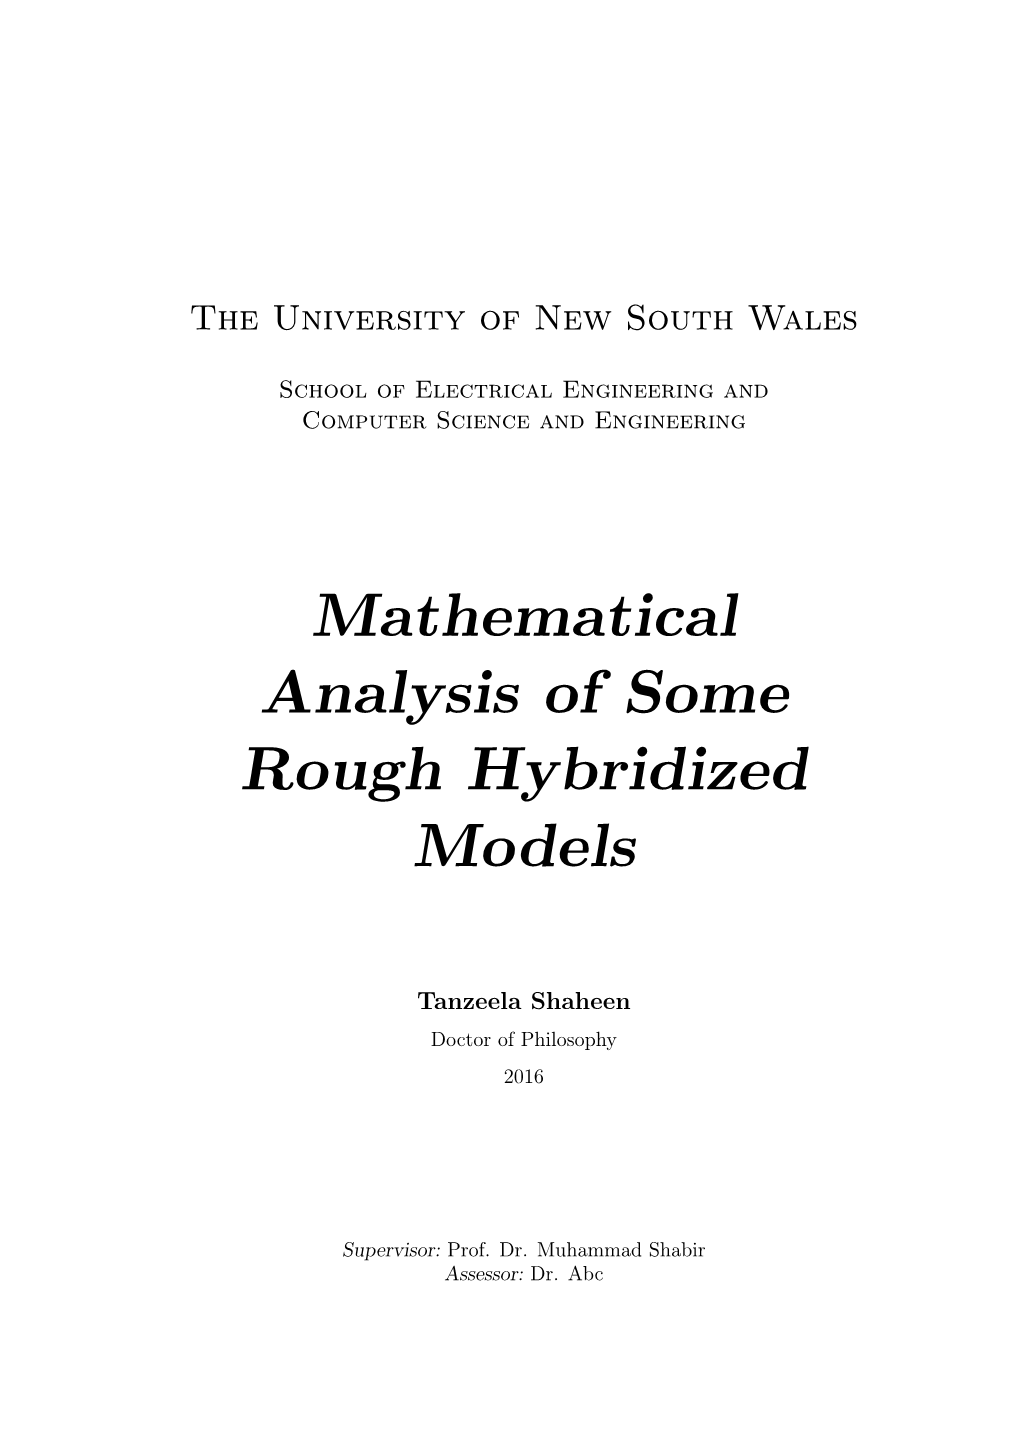 Mathematical Analysis of Some Rough Hybridized Models.Pdf